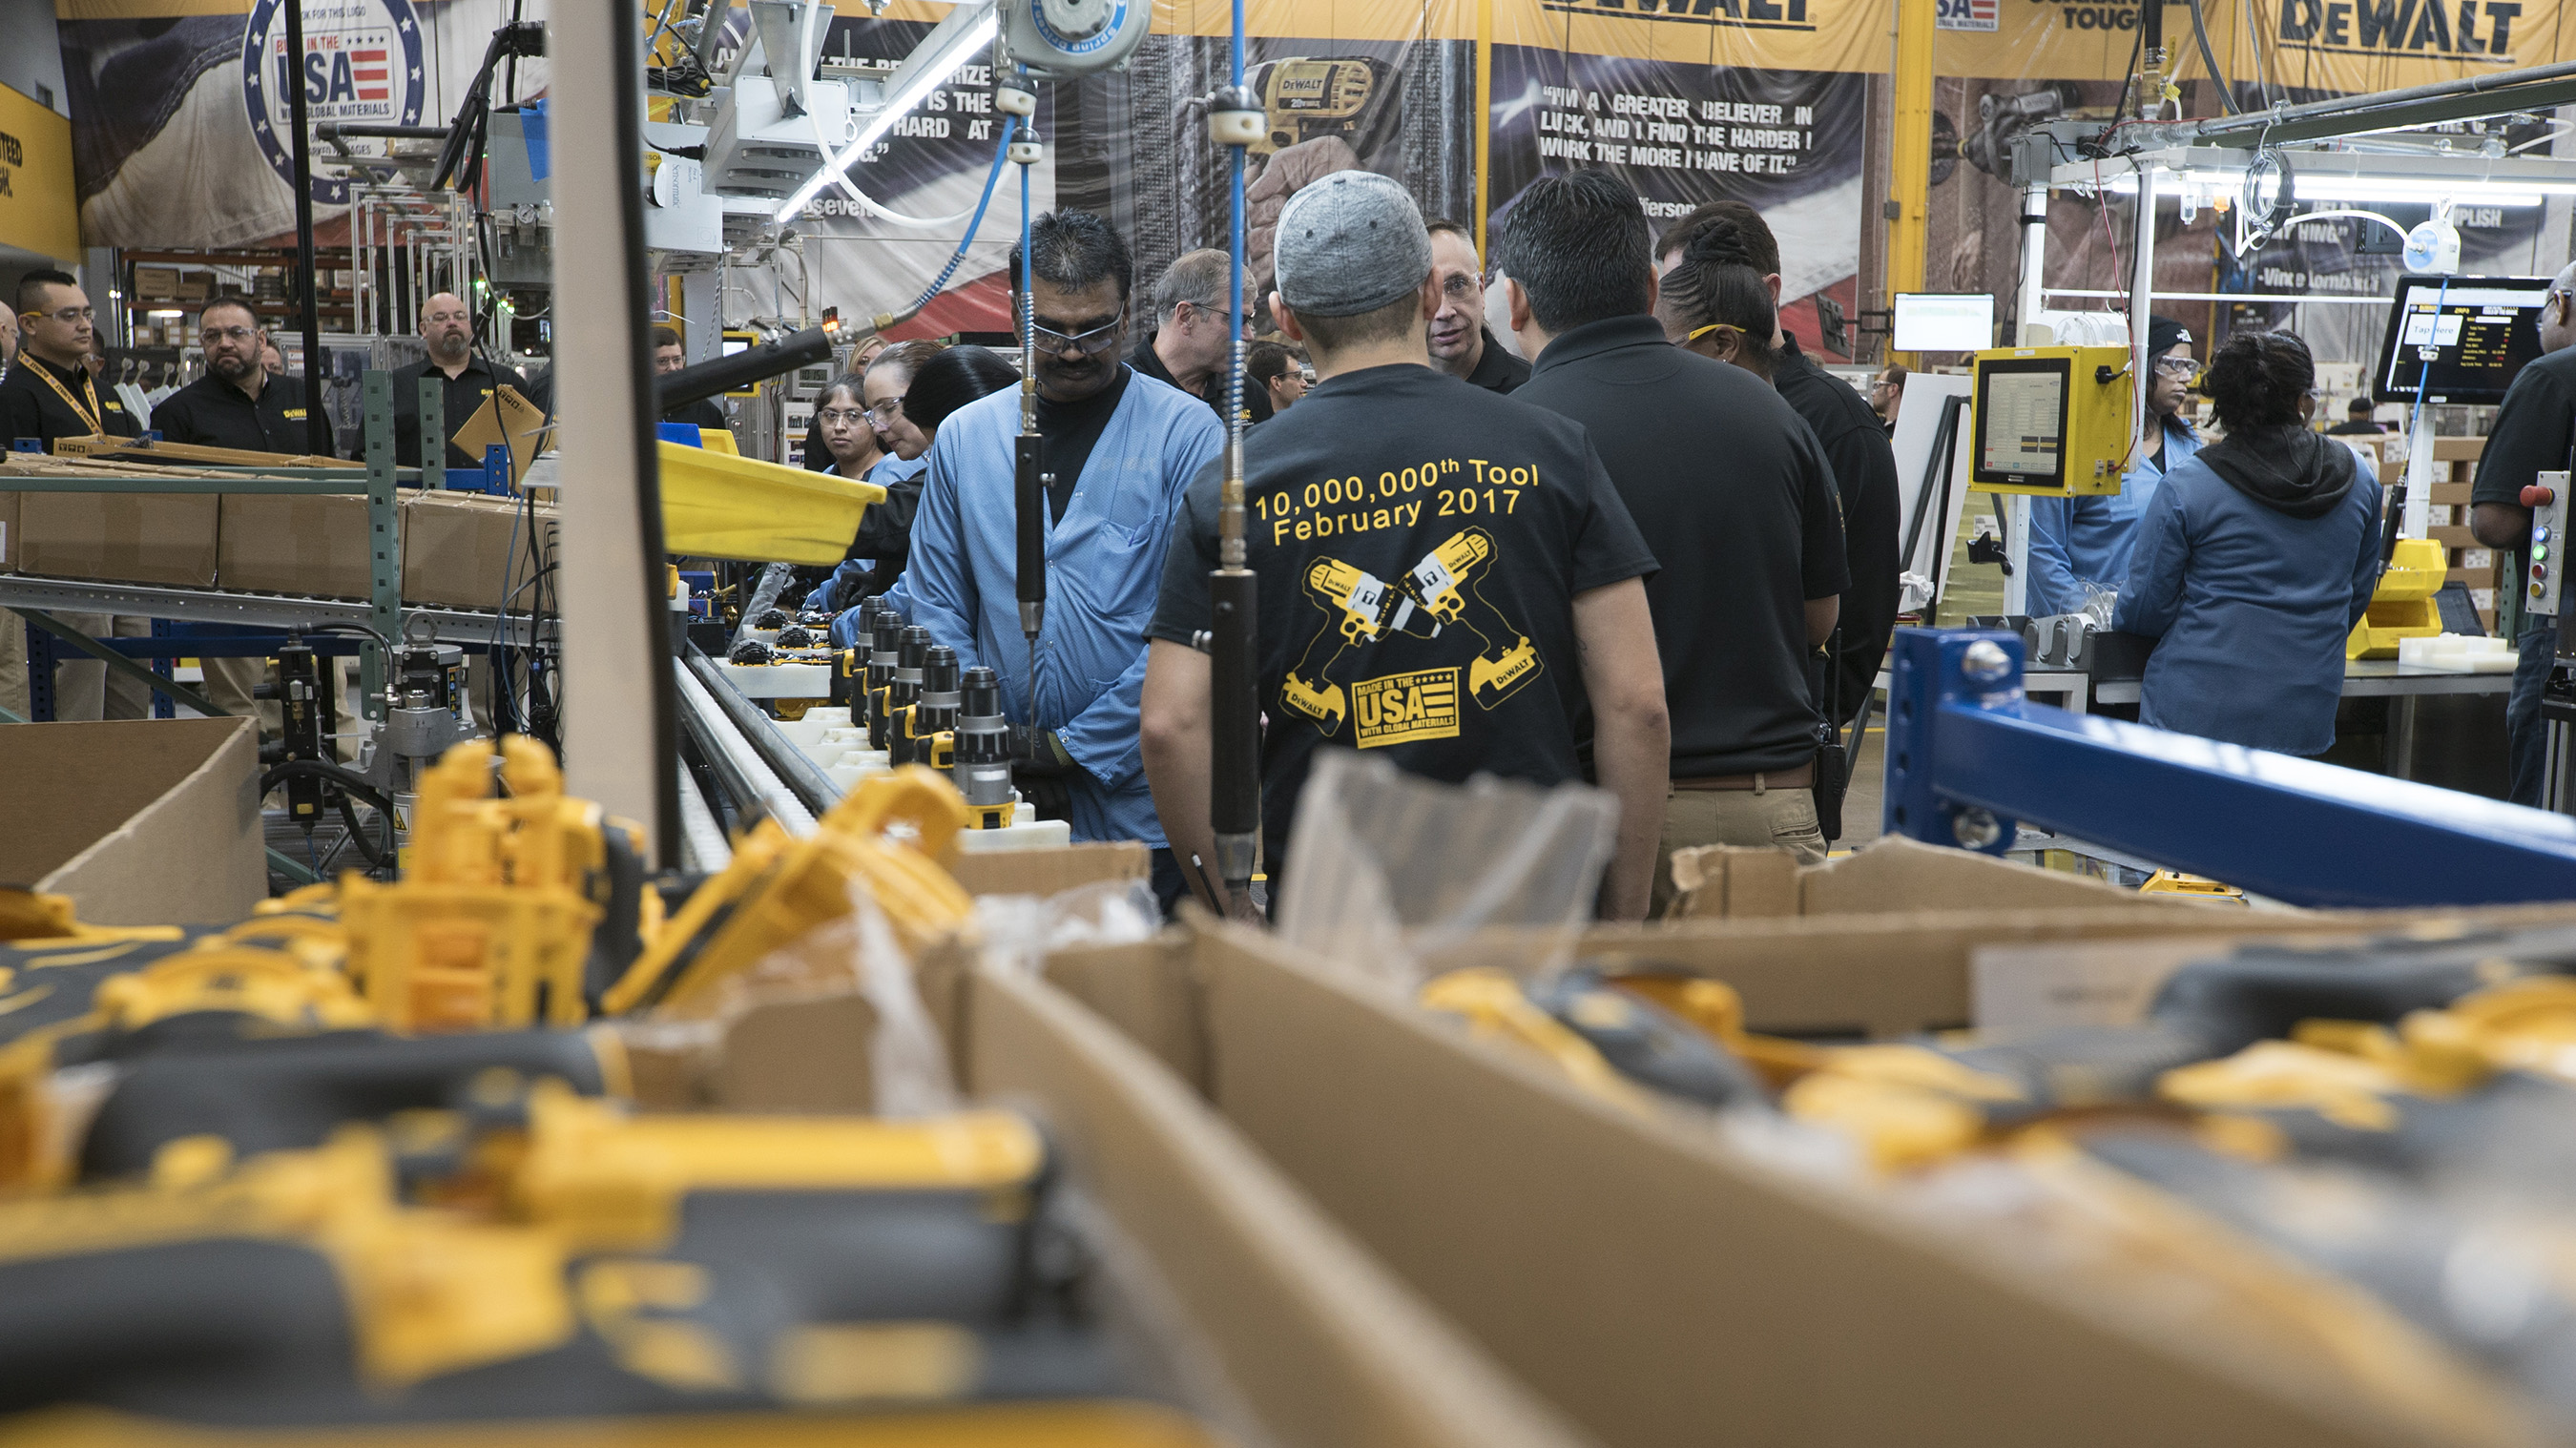 Employees Build 10-Millionth Tool at DEWALT® Charlotte, NC manufacturing plant.